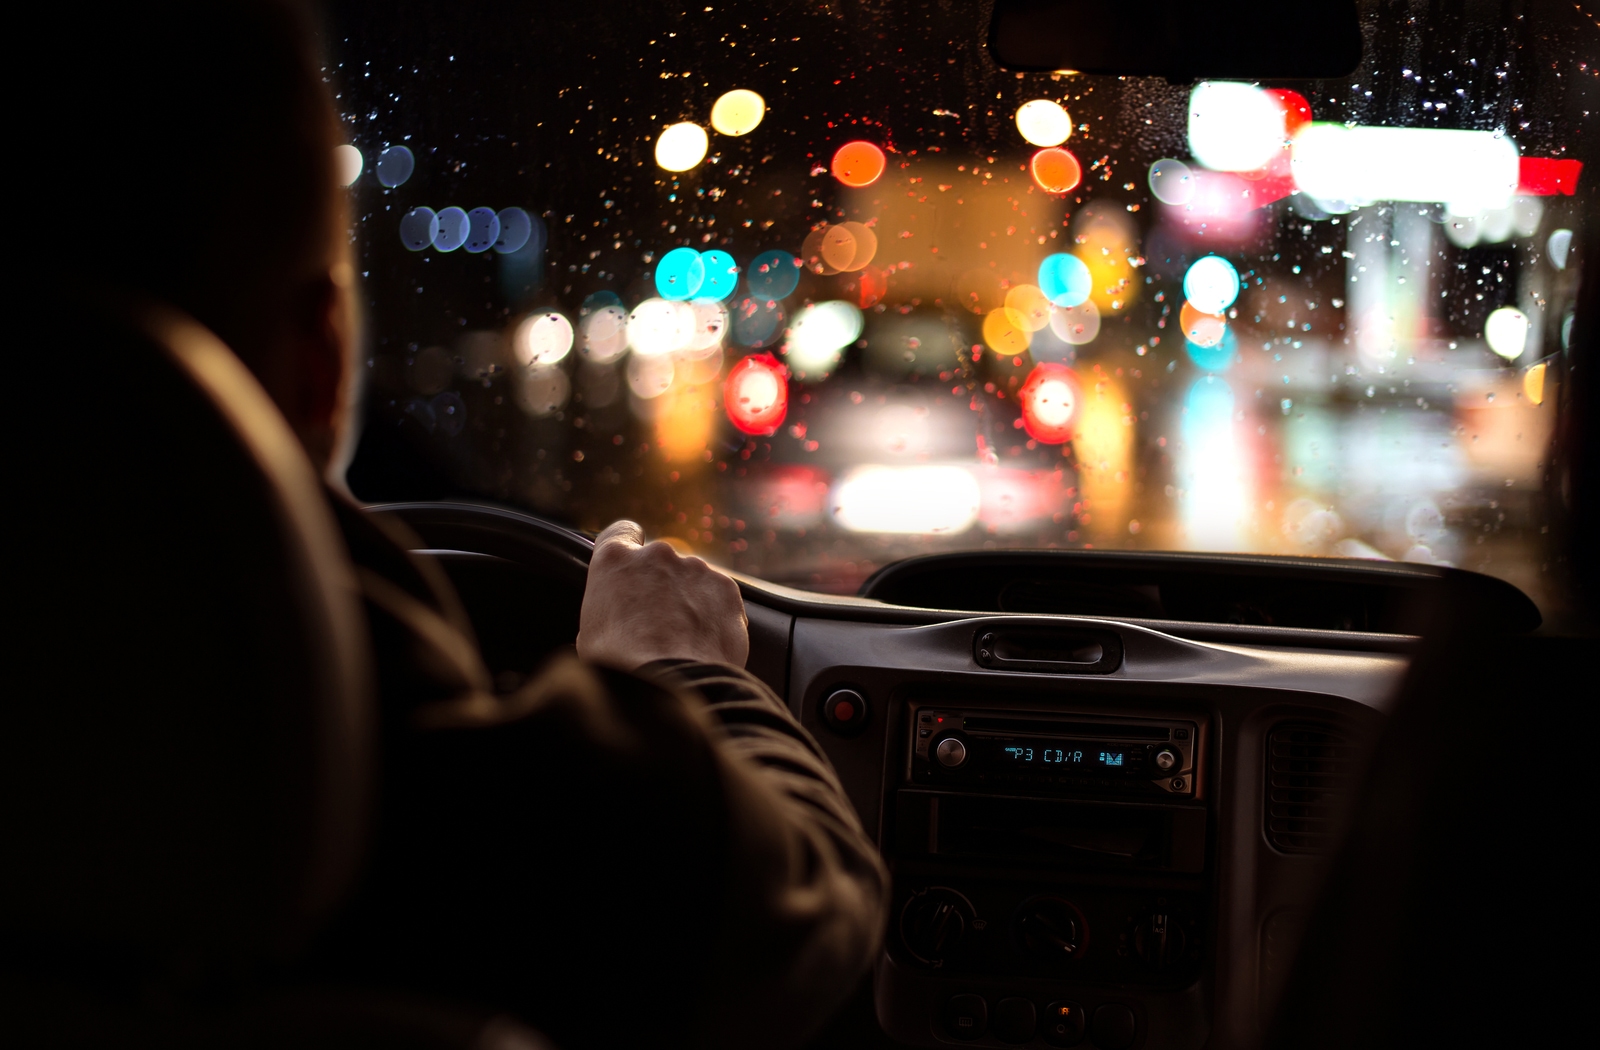 Tips for driving at night - B. Encouraging responsible and cautious driving at night